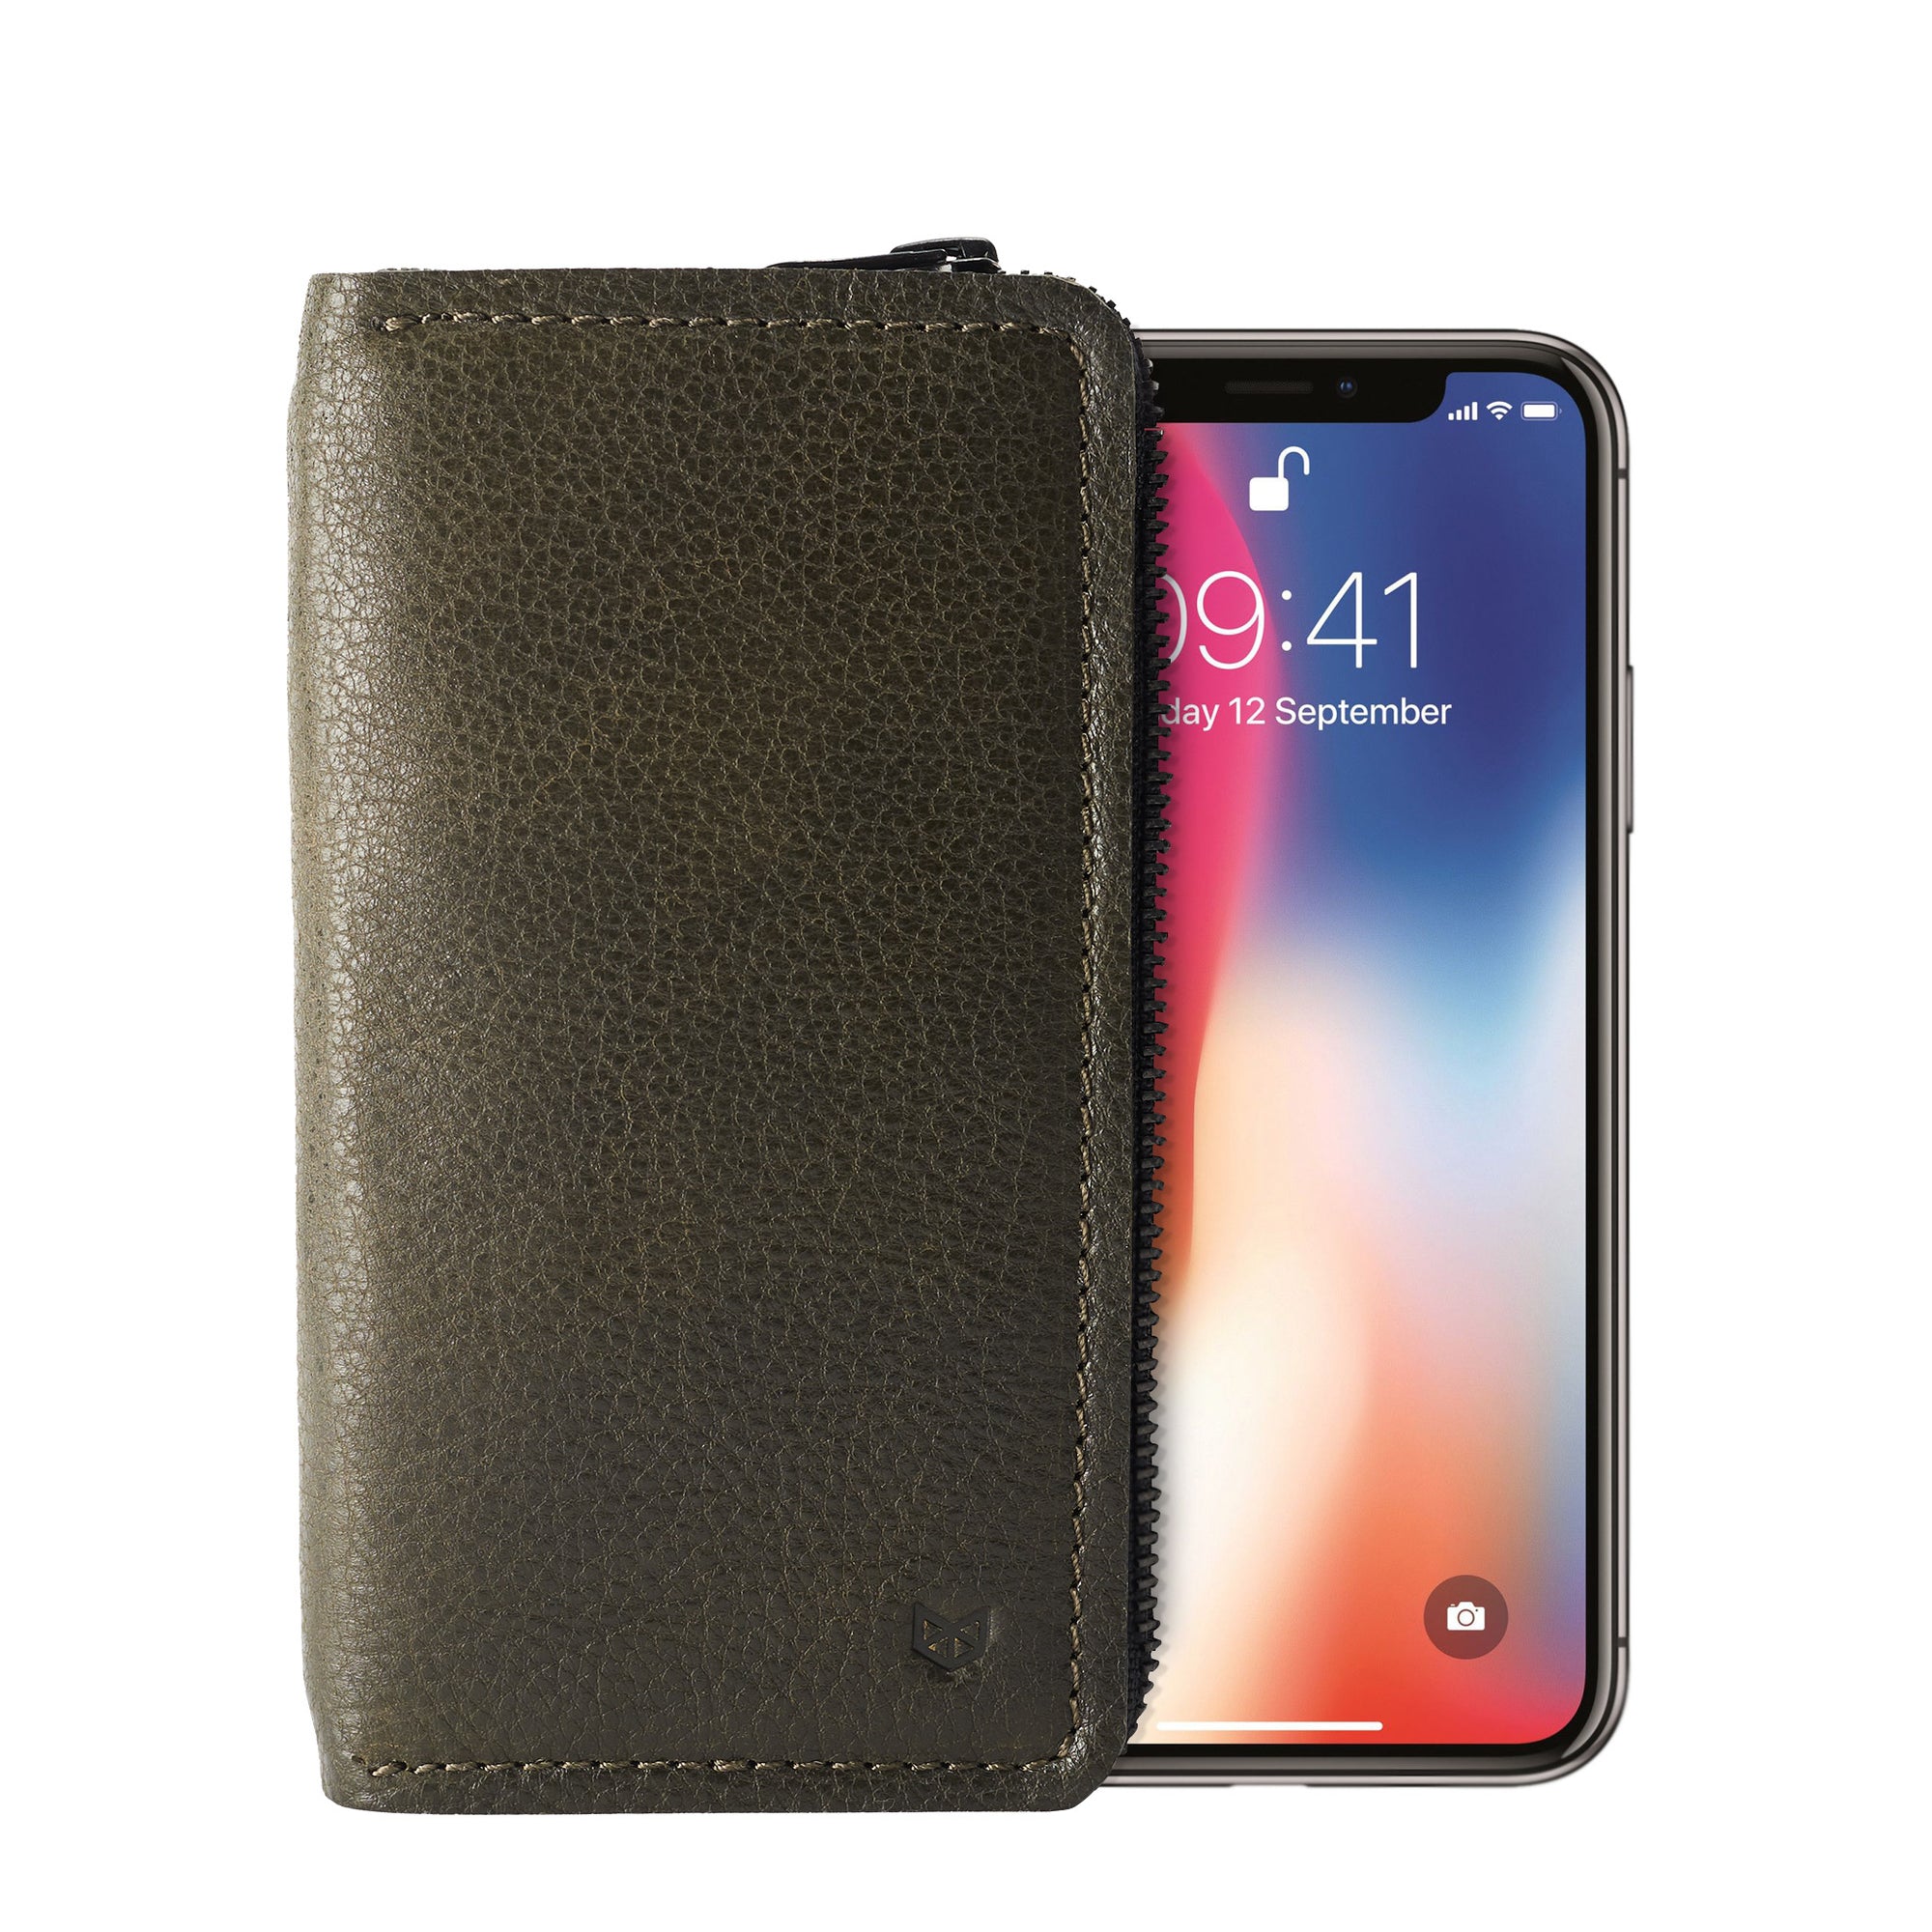 Green iPhone leather wallet stand case for mens gifts. iPhone x, iPhone 10, iPhone 8 plus leather stand sleeve